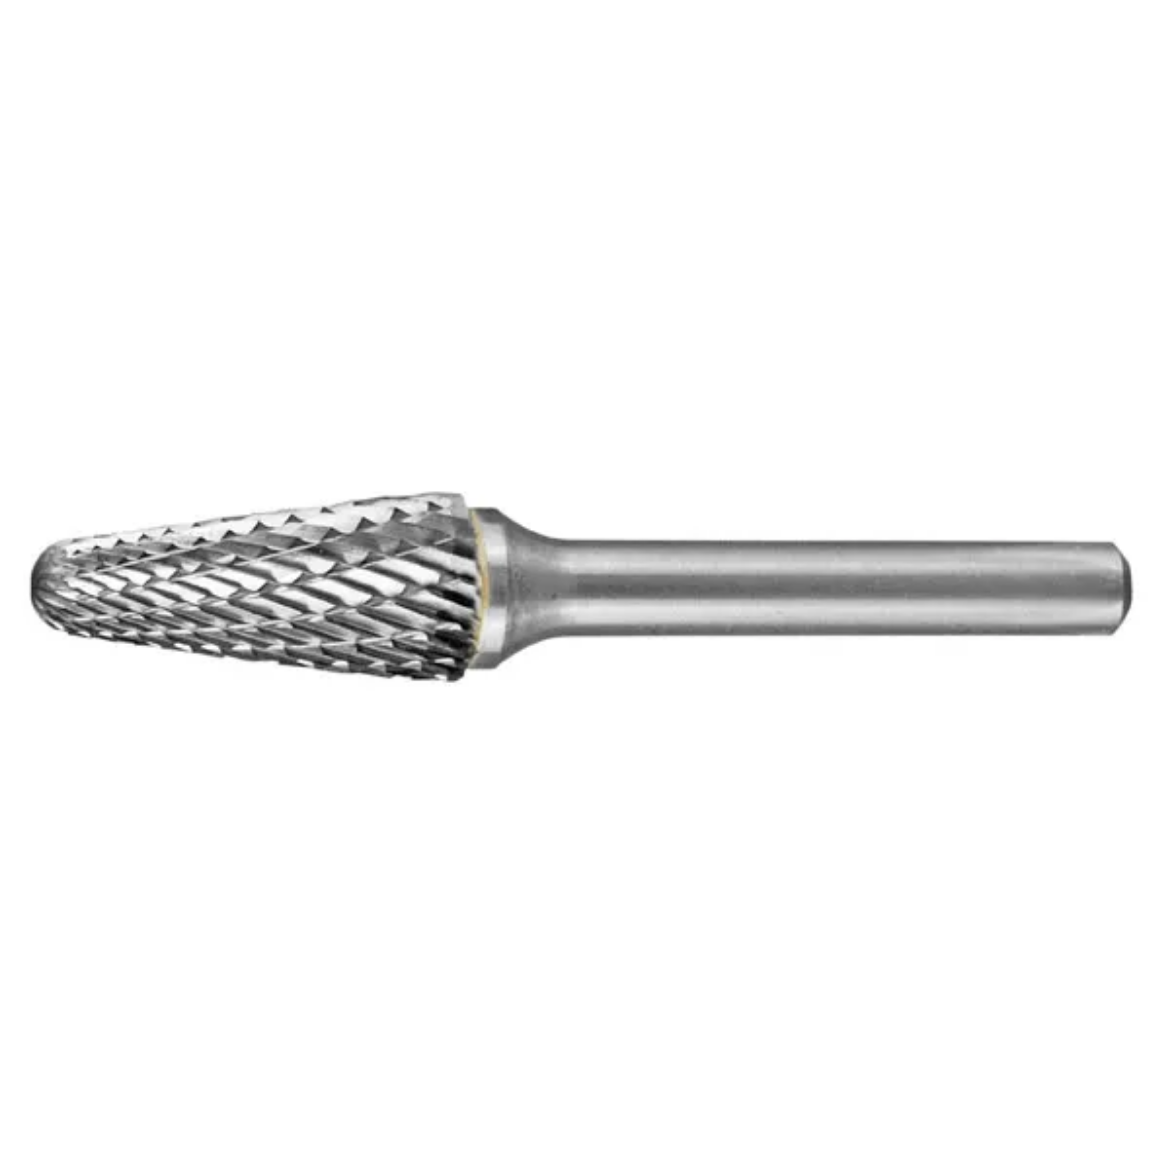 Picture of HOLEMAKER CARBIDE BURR, TAPERED RADIUS END, 3/8" X 1-1/16" HEAD, 1/4" SHANK DC